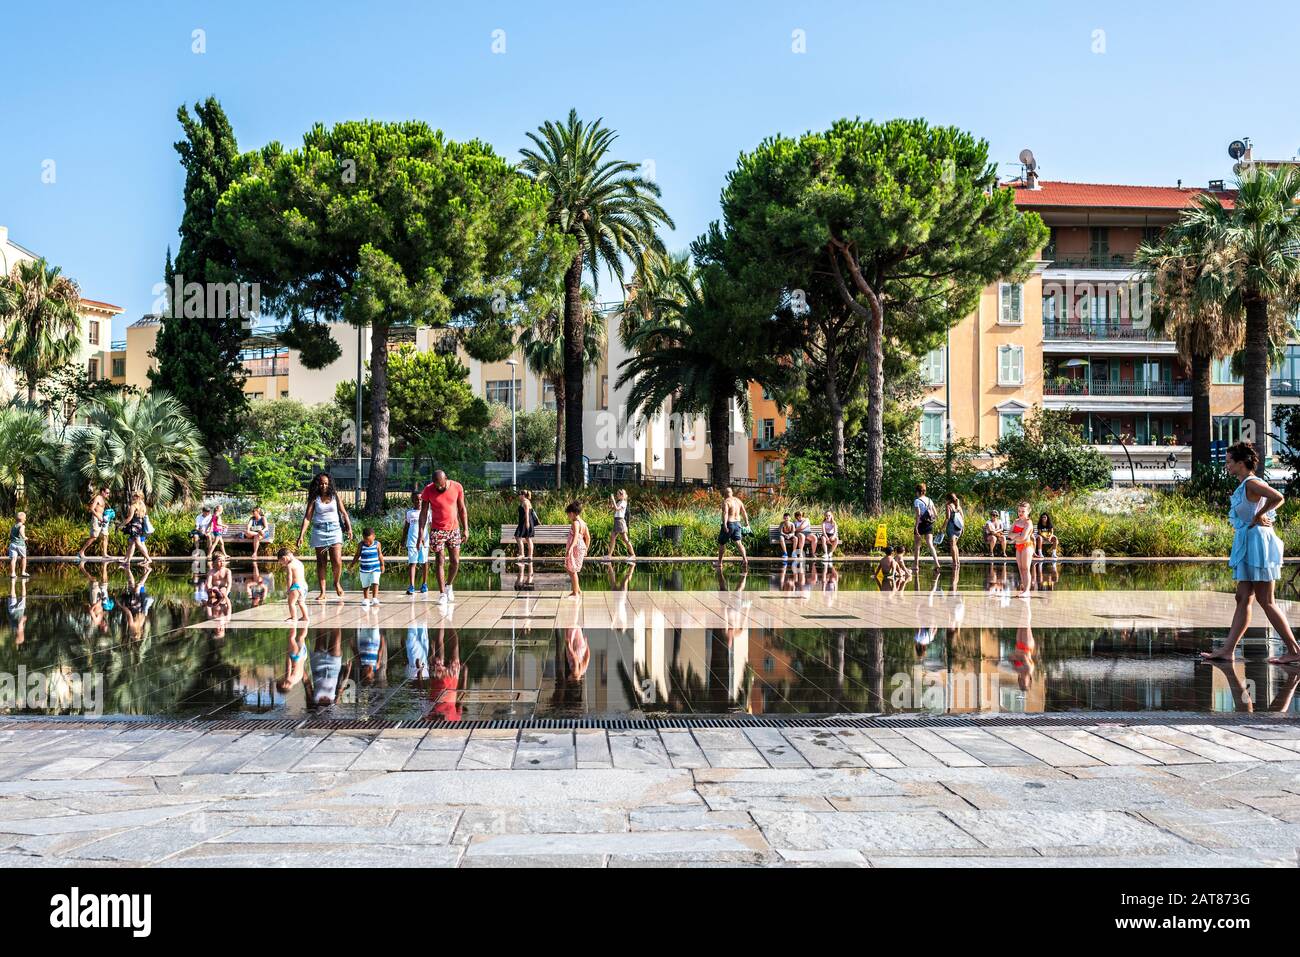 This new urban park has been created in 2013. It’s been described as a green open space with multiple playgrounds as well as the famous Mirroir d’Eau. Stock Photo